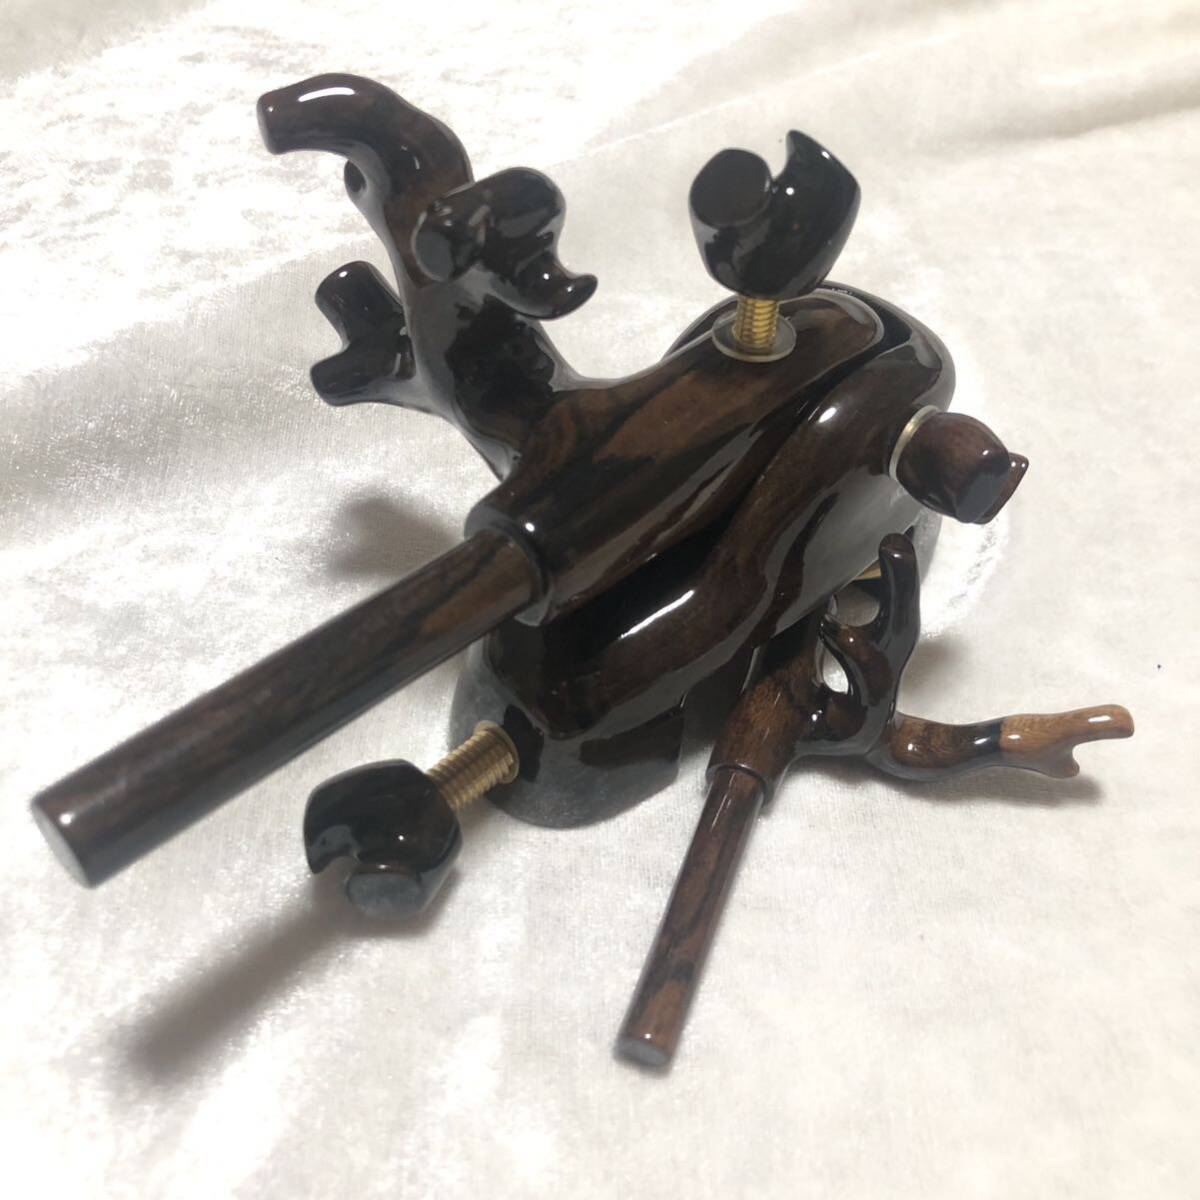  crucian carp natural tree black persimmon small . vise small size vise super-beauty goods sack attaching spatula supplies 